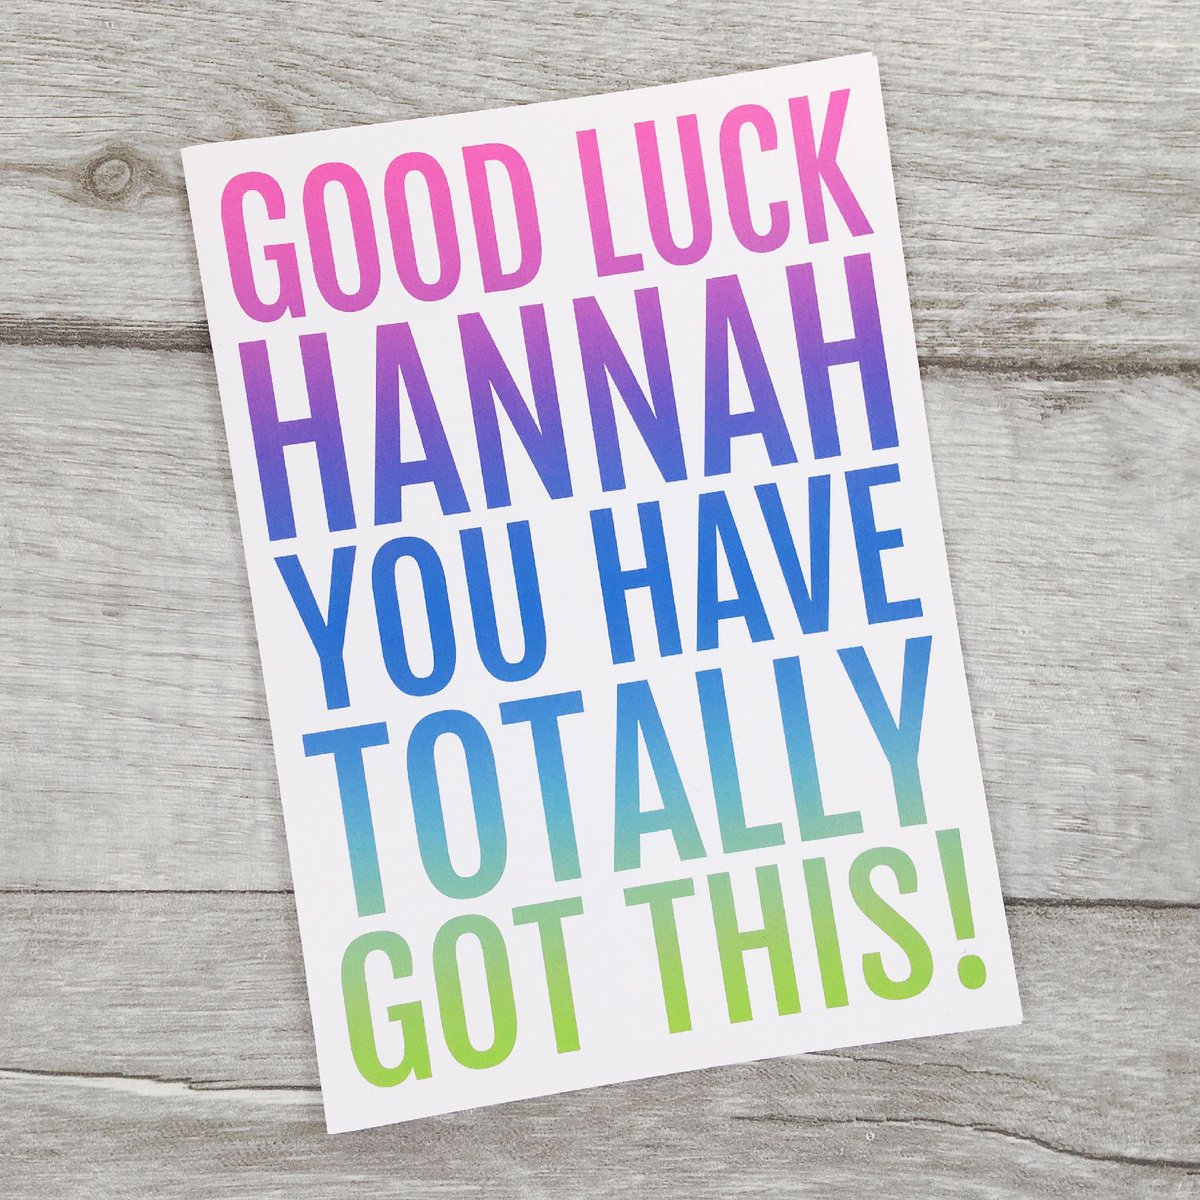 GCSE and A-level exams start soon. Wish them a special good luck with these personalised cards. I can even send direct! #Earlybiz #onlinecraft buff.ly/3dJxixc